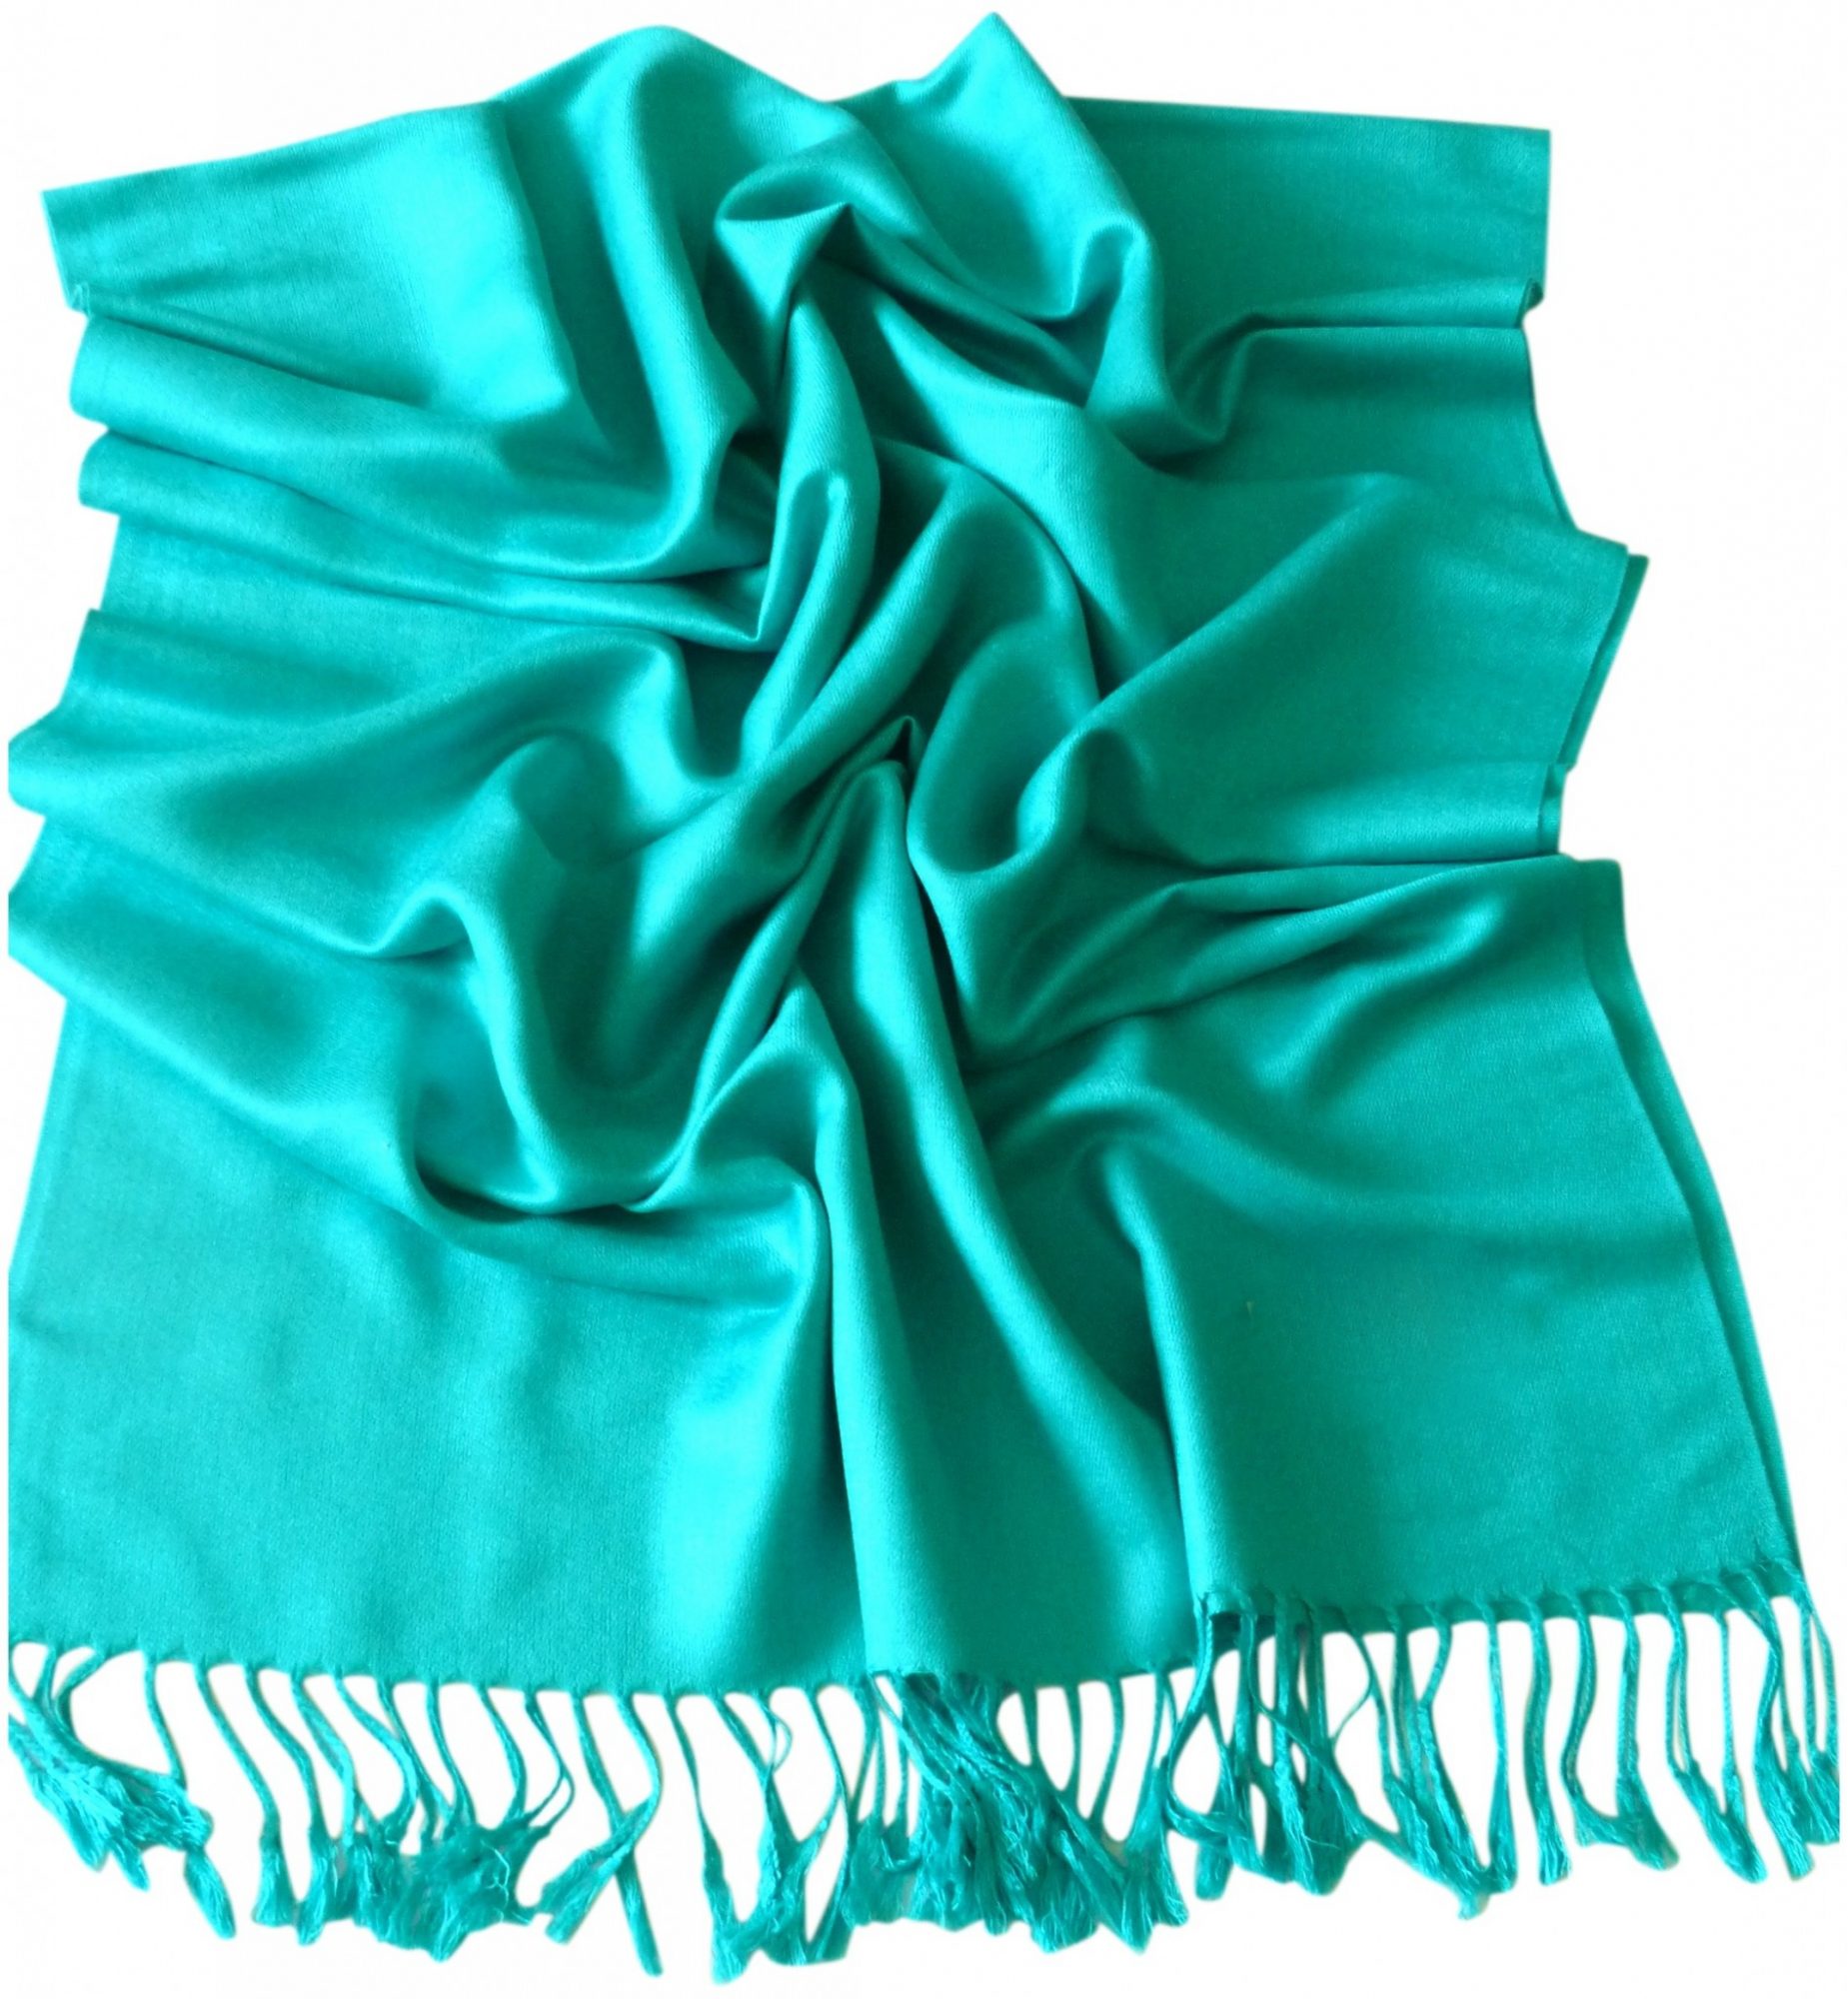 Blue Green Solid Color Design Pashmina Shawl Scarf Wrap Pashminas Shawls NEW a1010-358